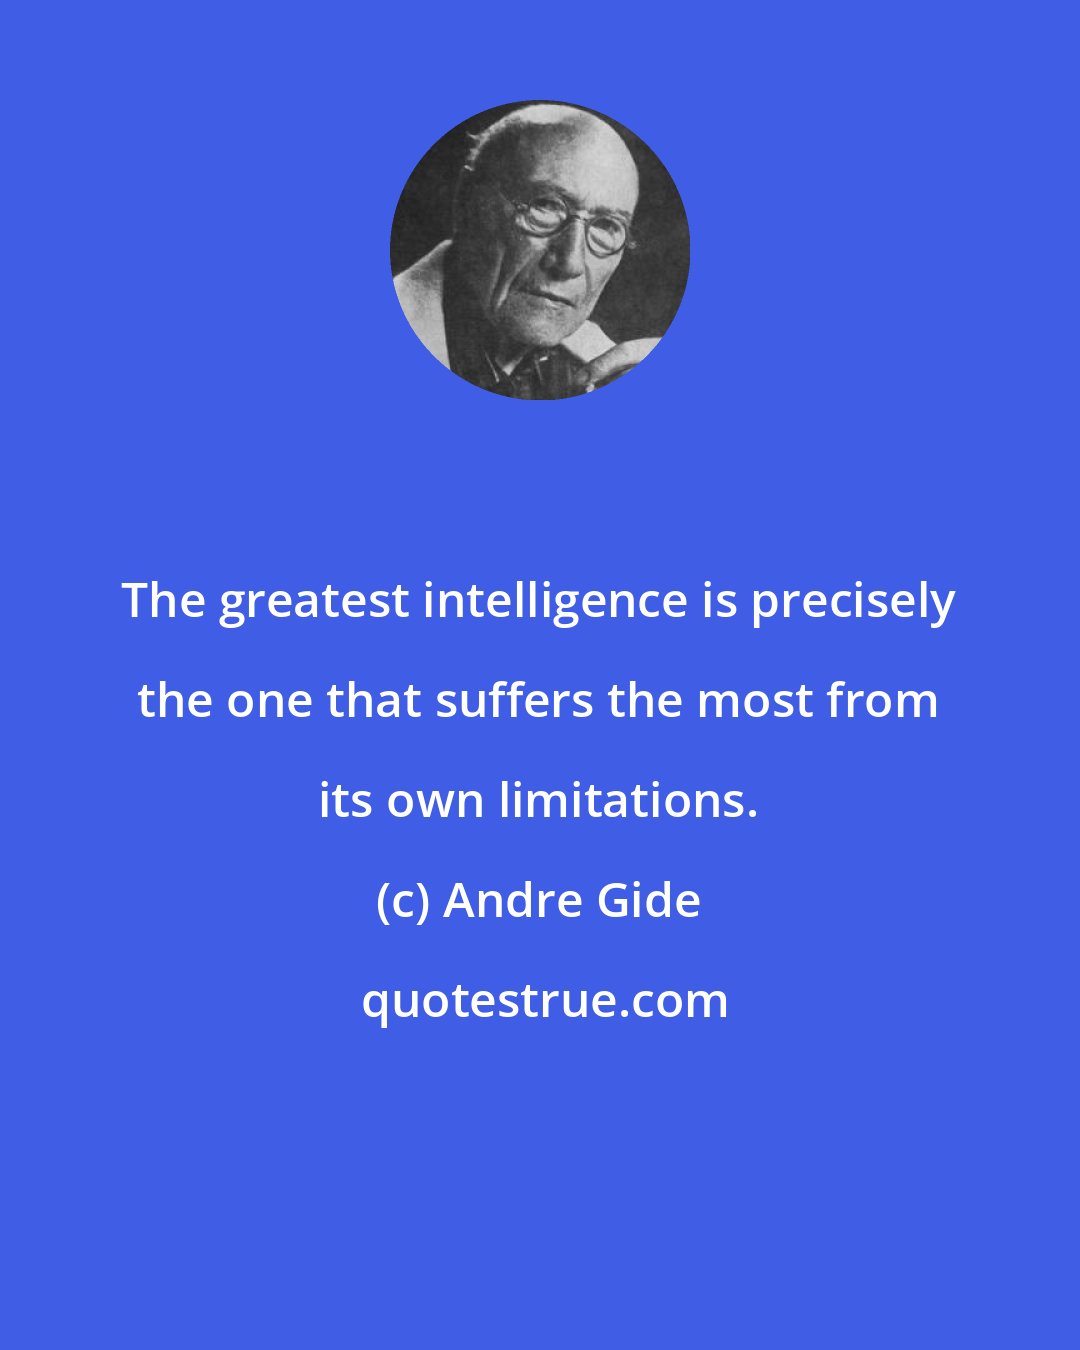 Andre Gide: The greatest intelligence is precisely the one that suffers the most from its own limitations.